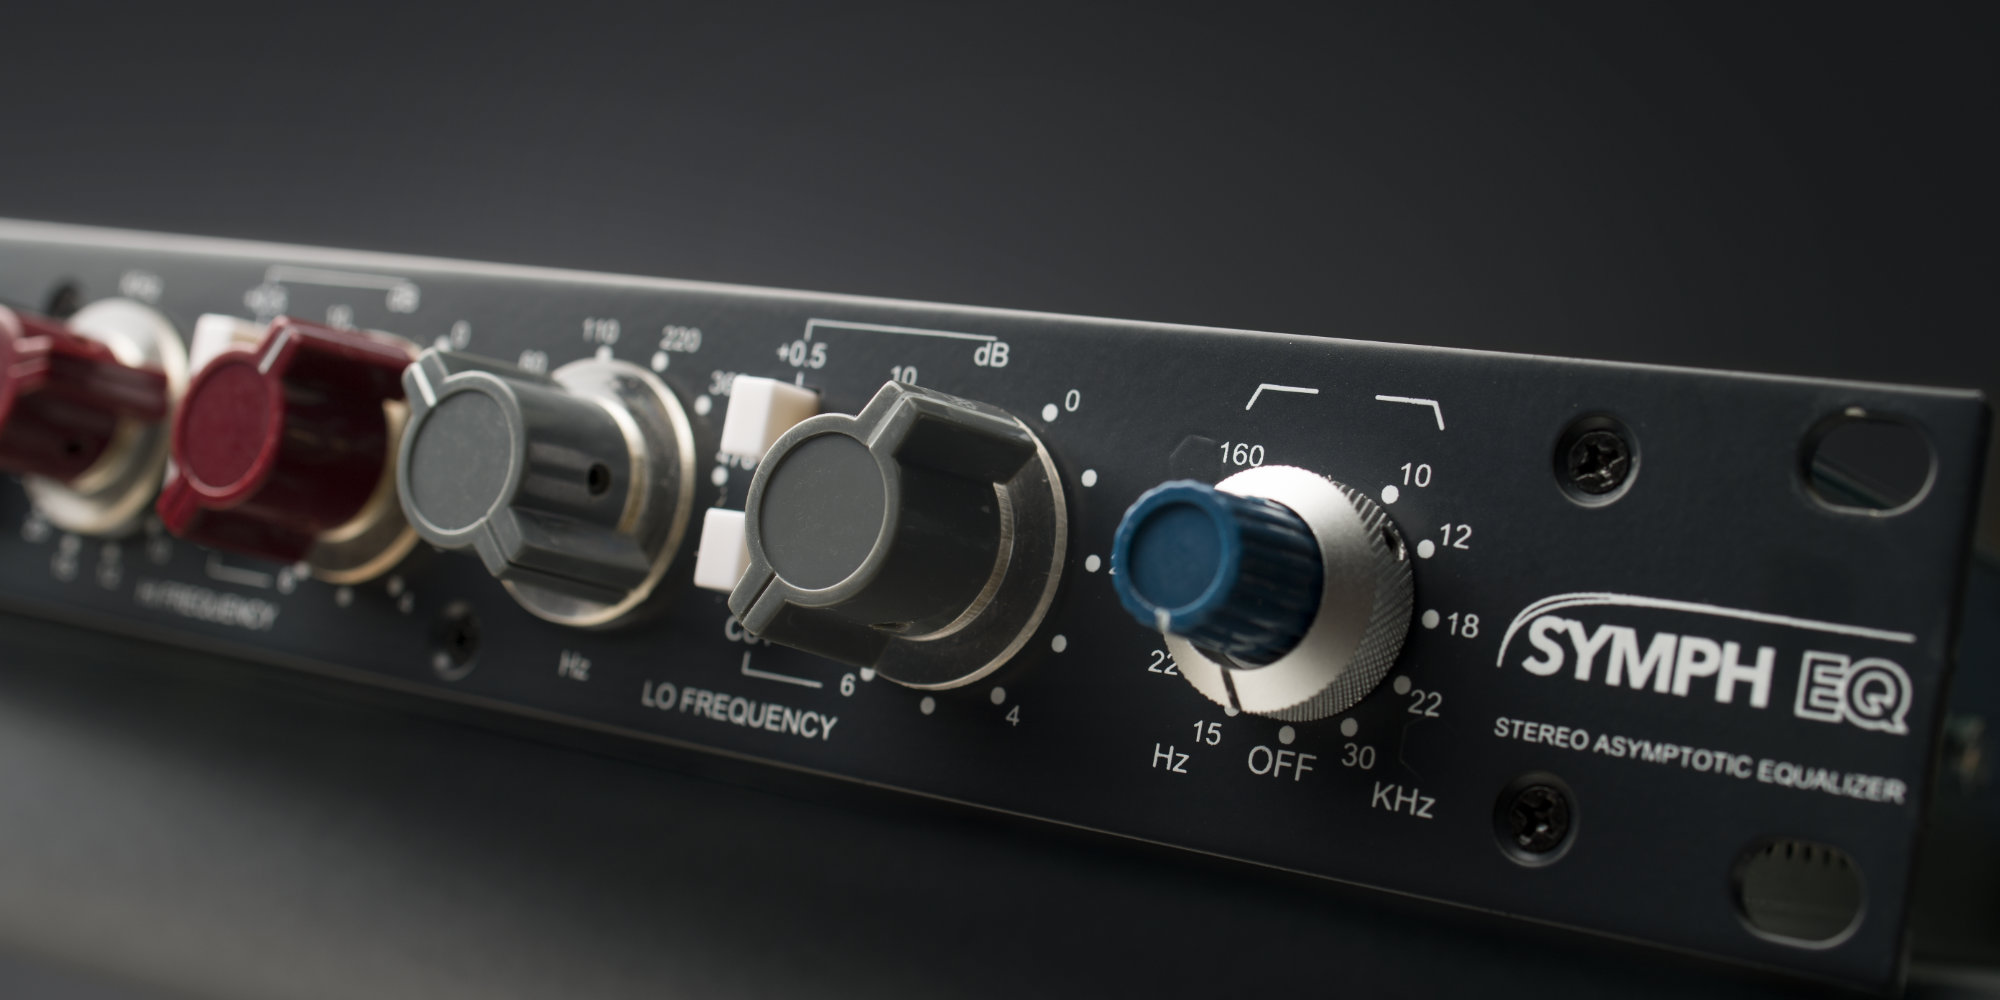 Mer information om "Heritage Audio introduce the SYMPH EQ"